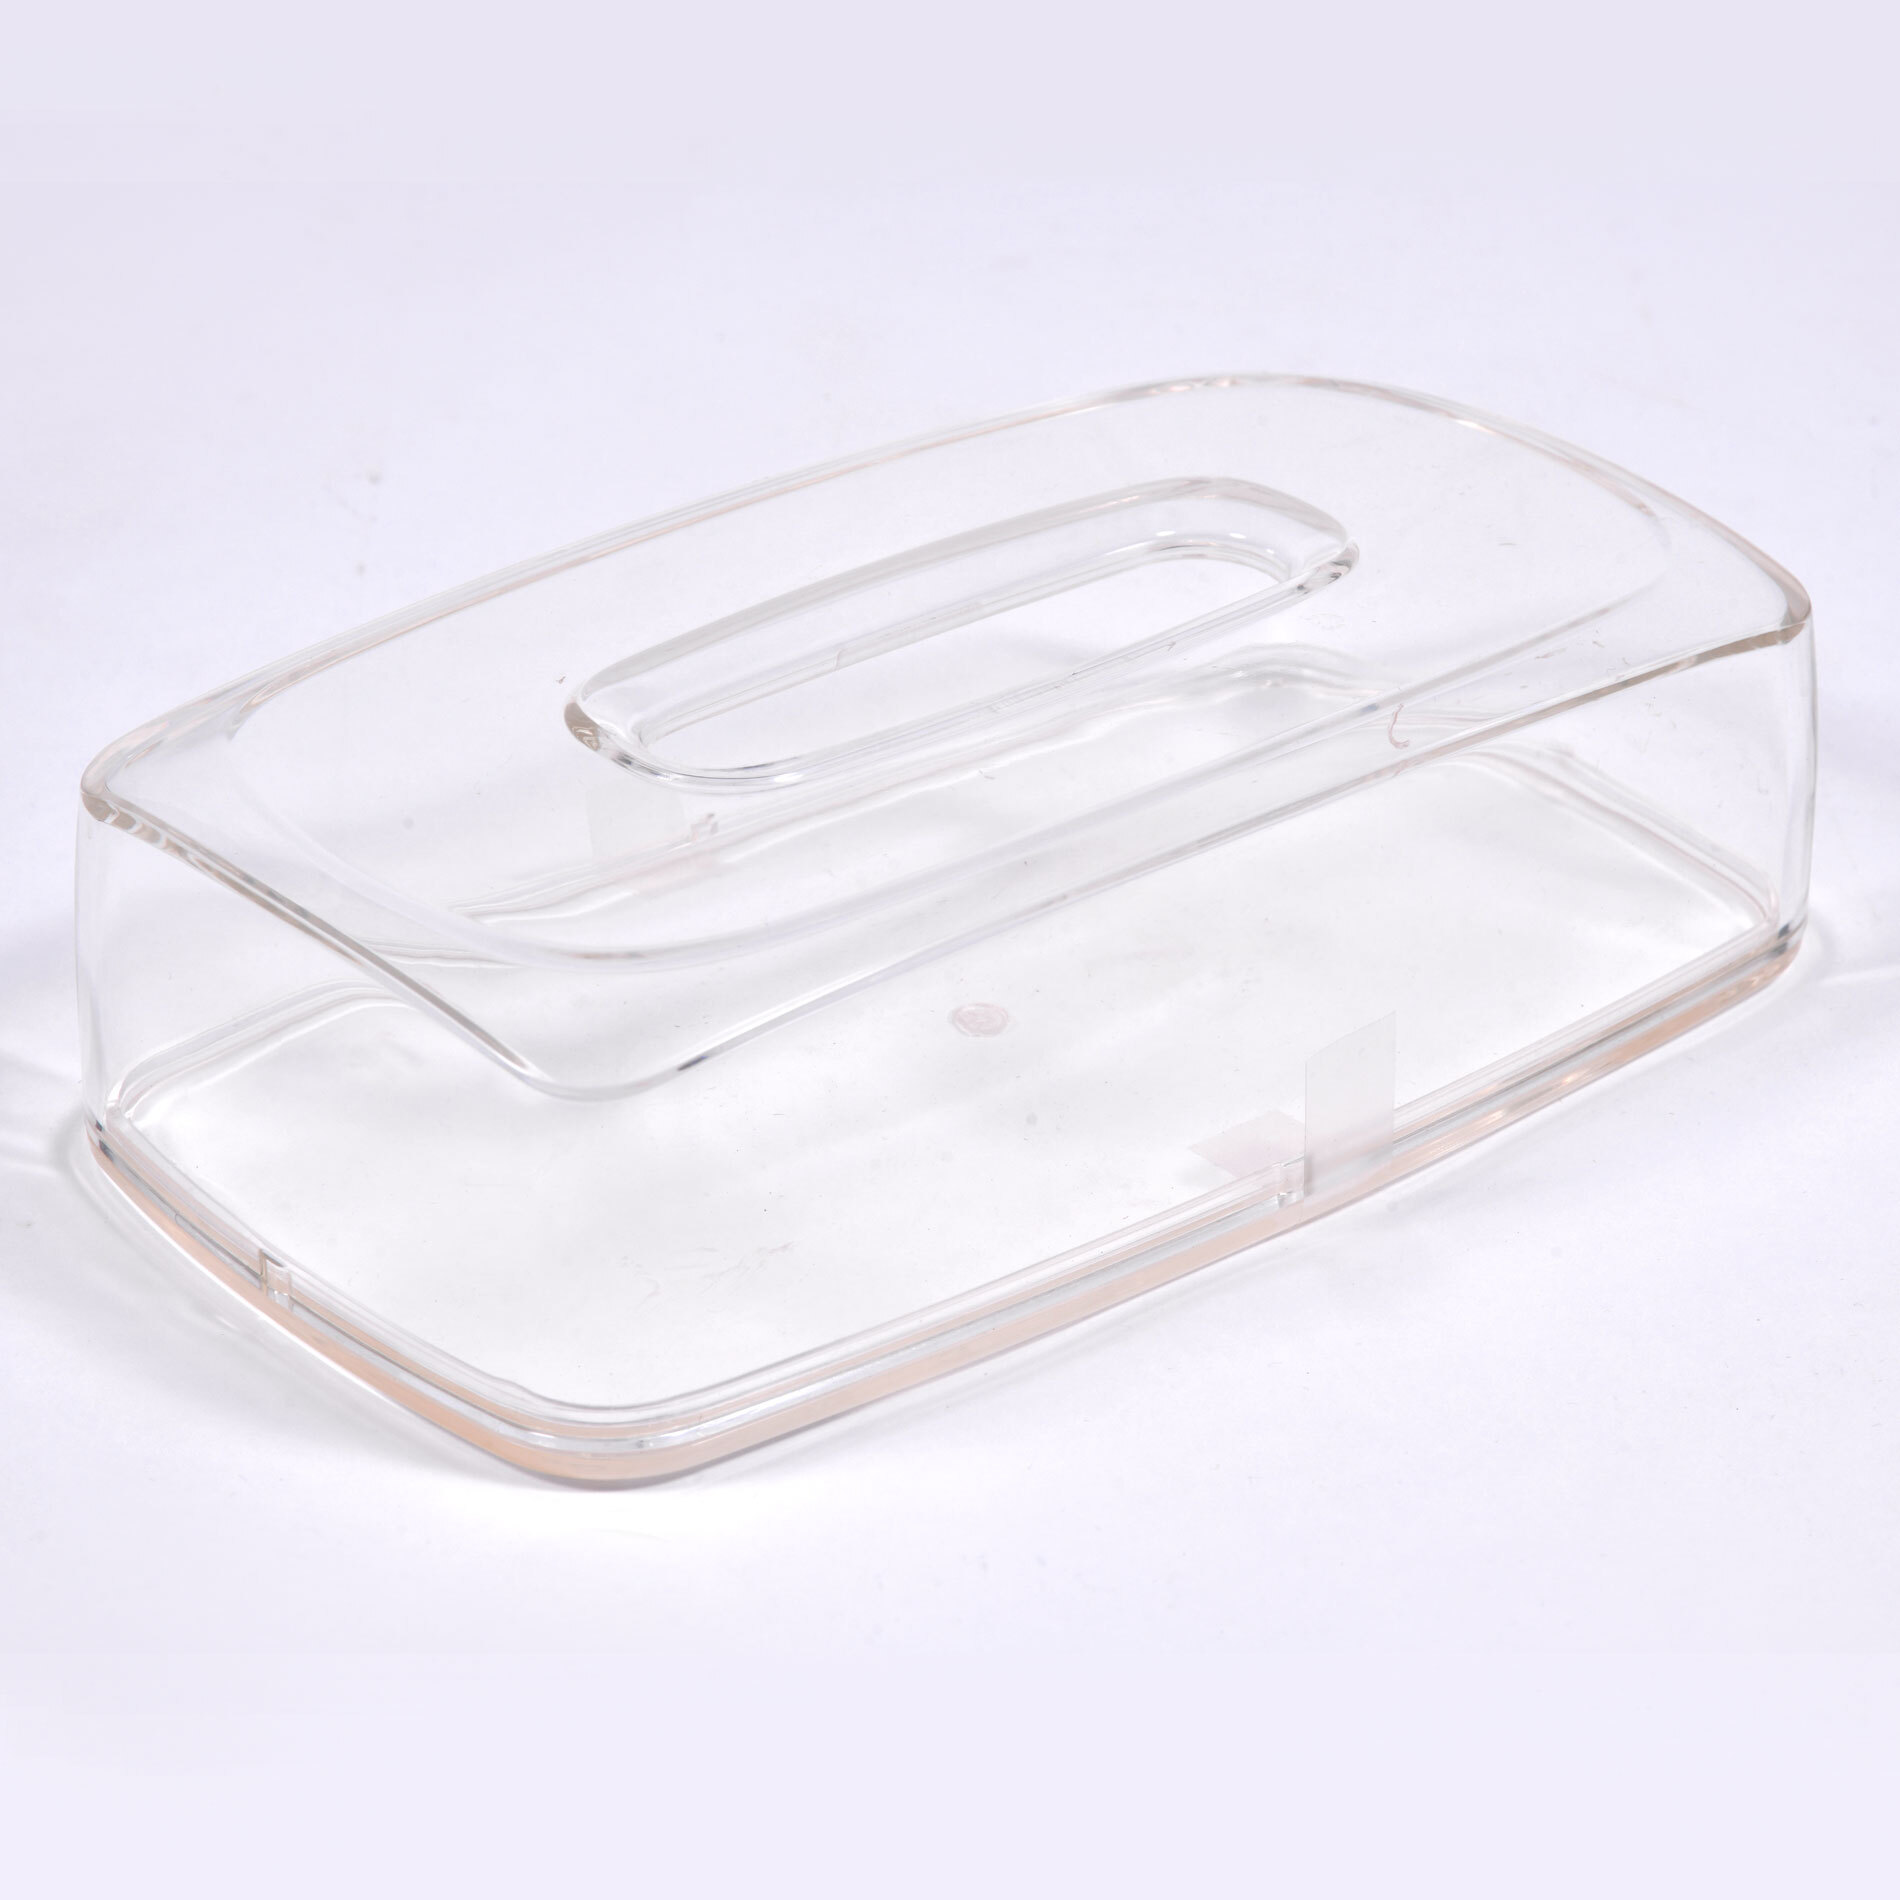 The image for Us Lucite Tissue Box 01